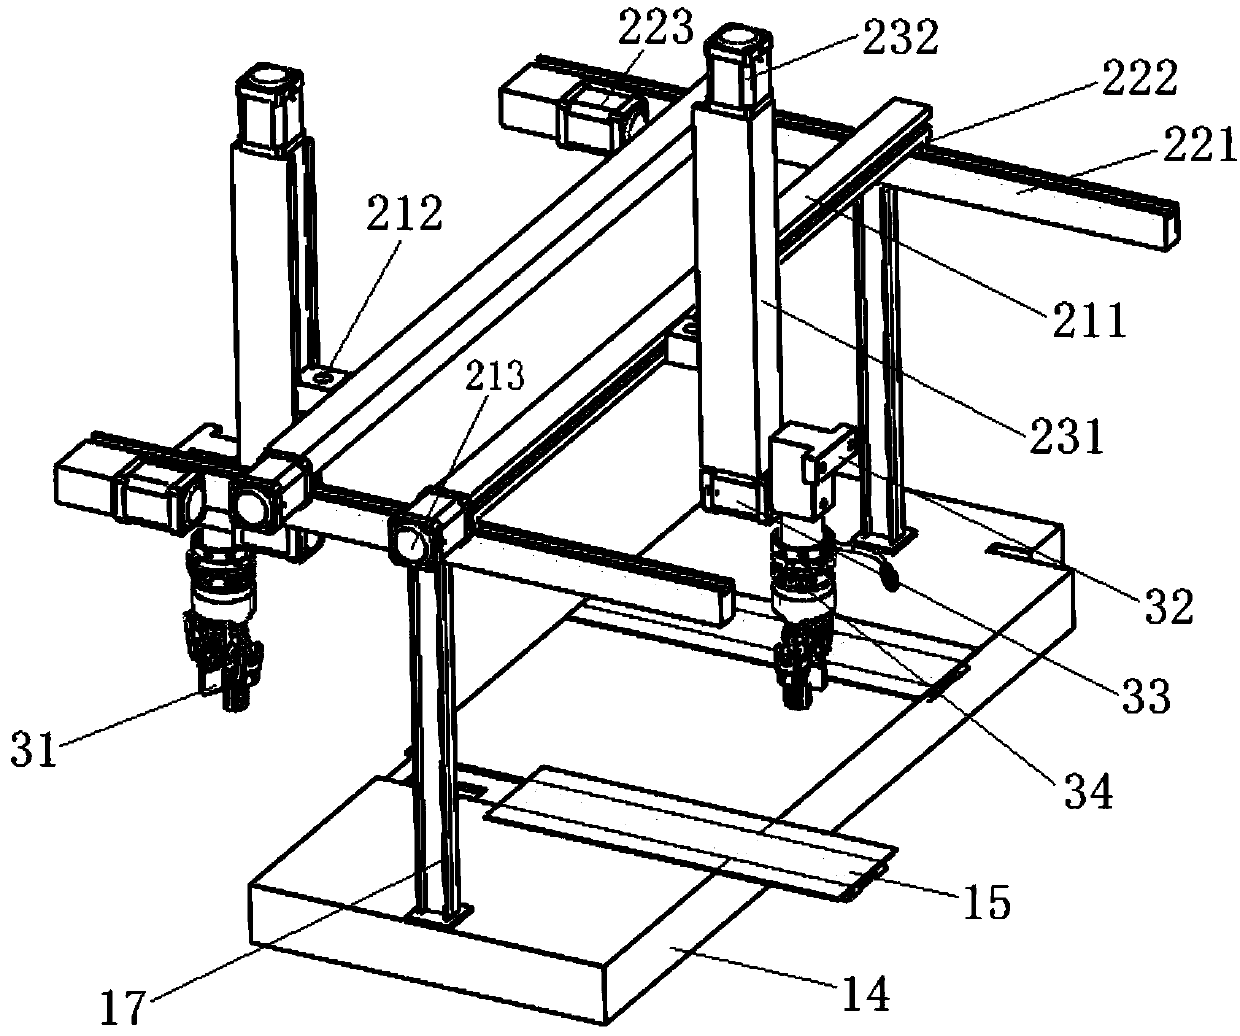 Sorting and stacking device based on three-coordinate manipulator